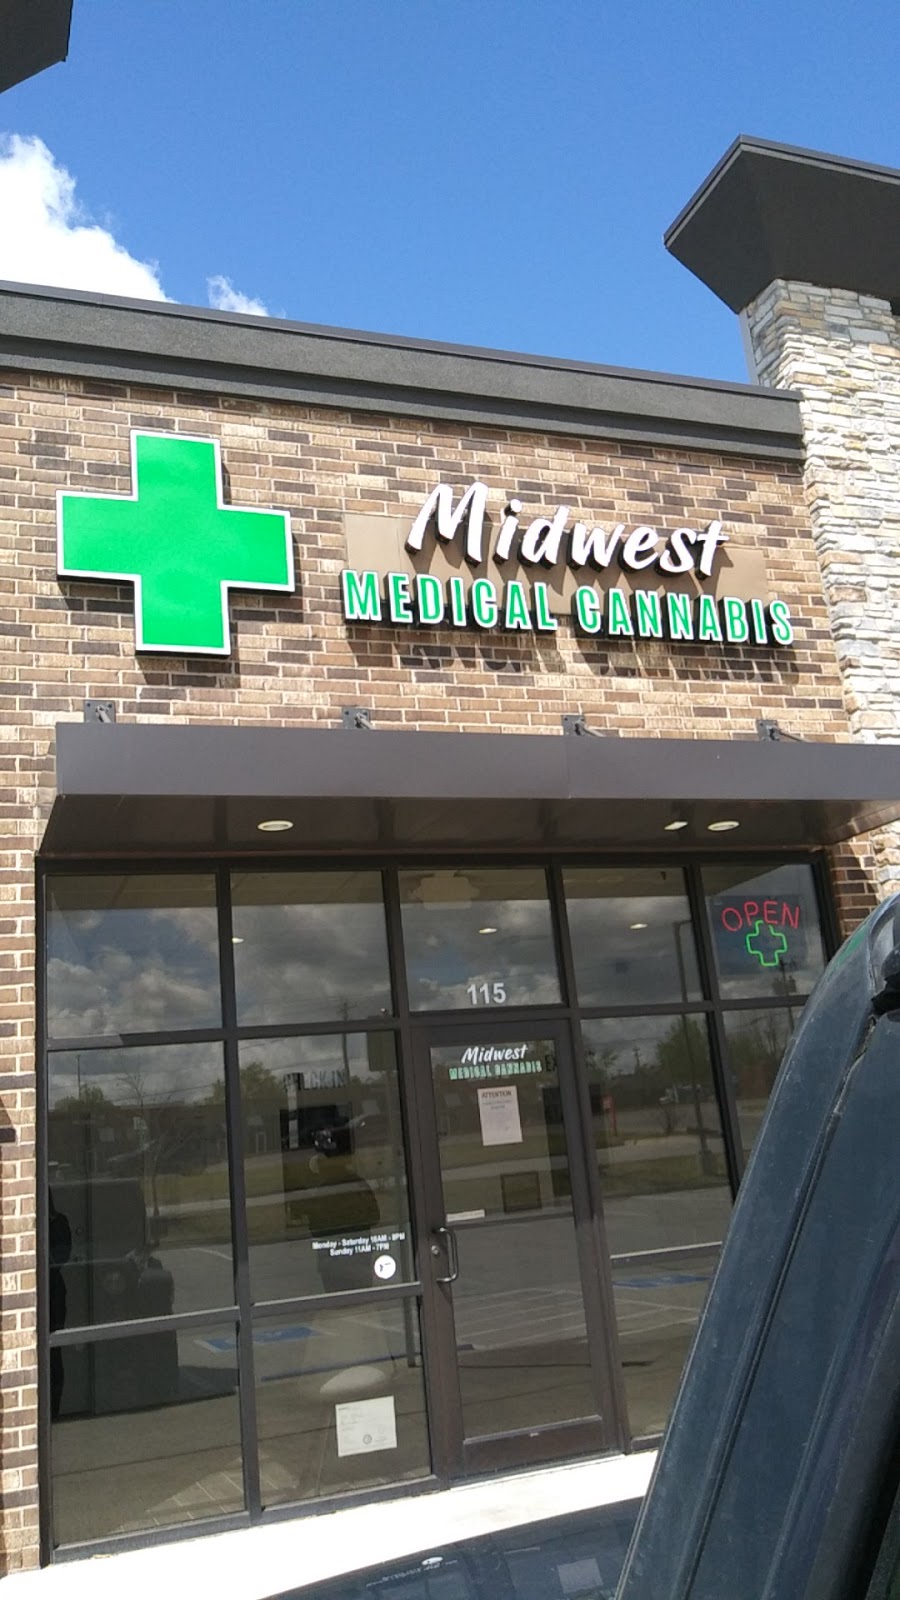 Midwest Medical Cannabis